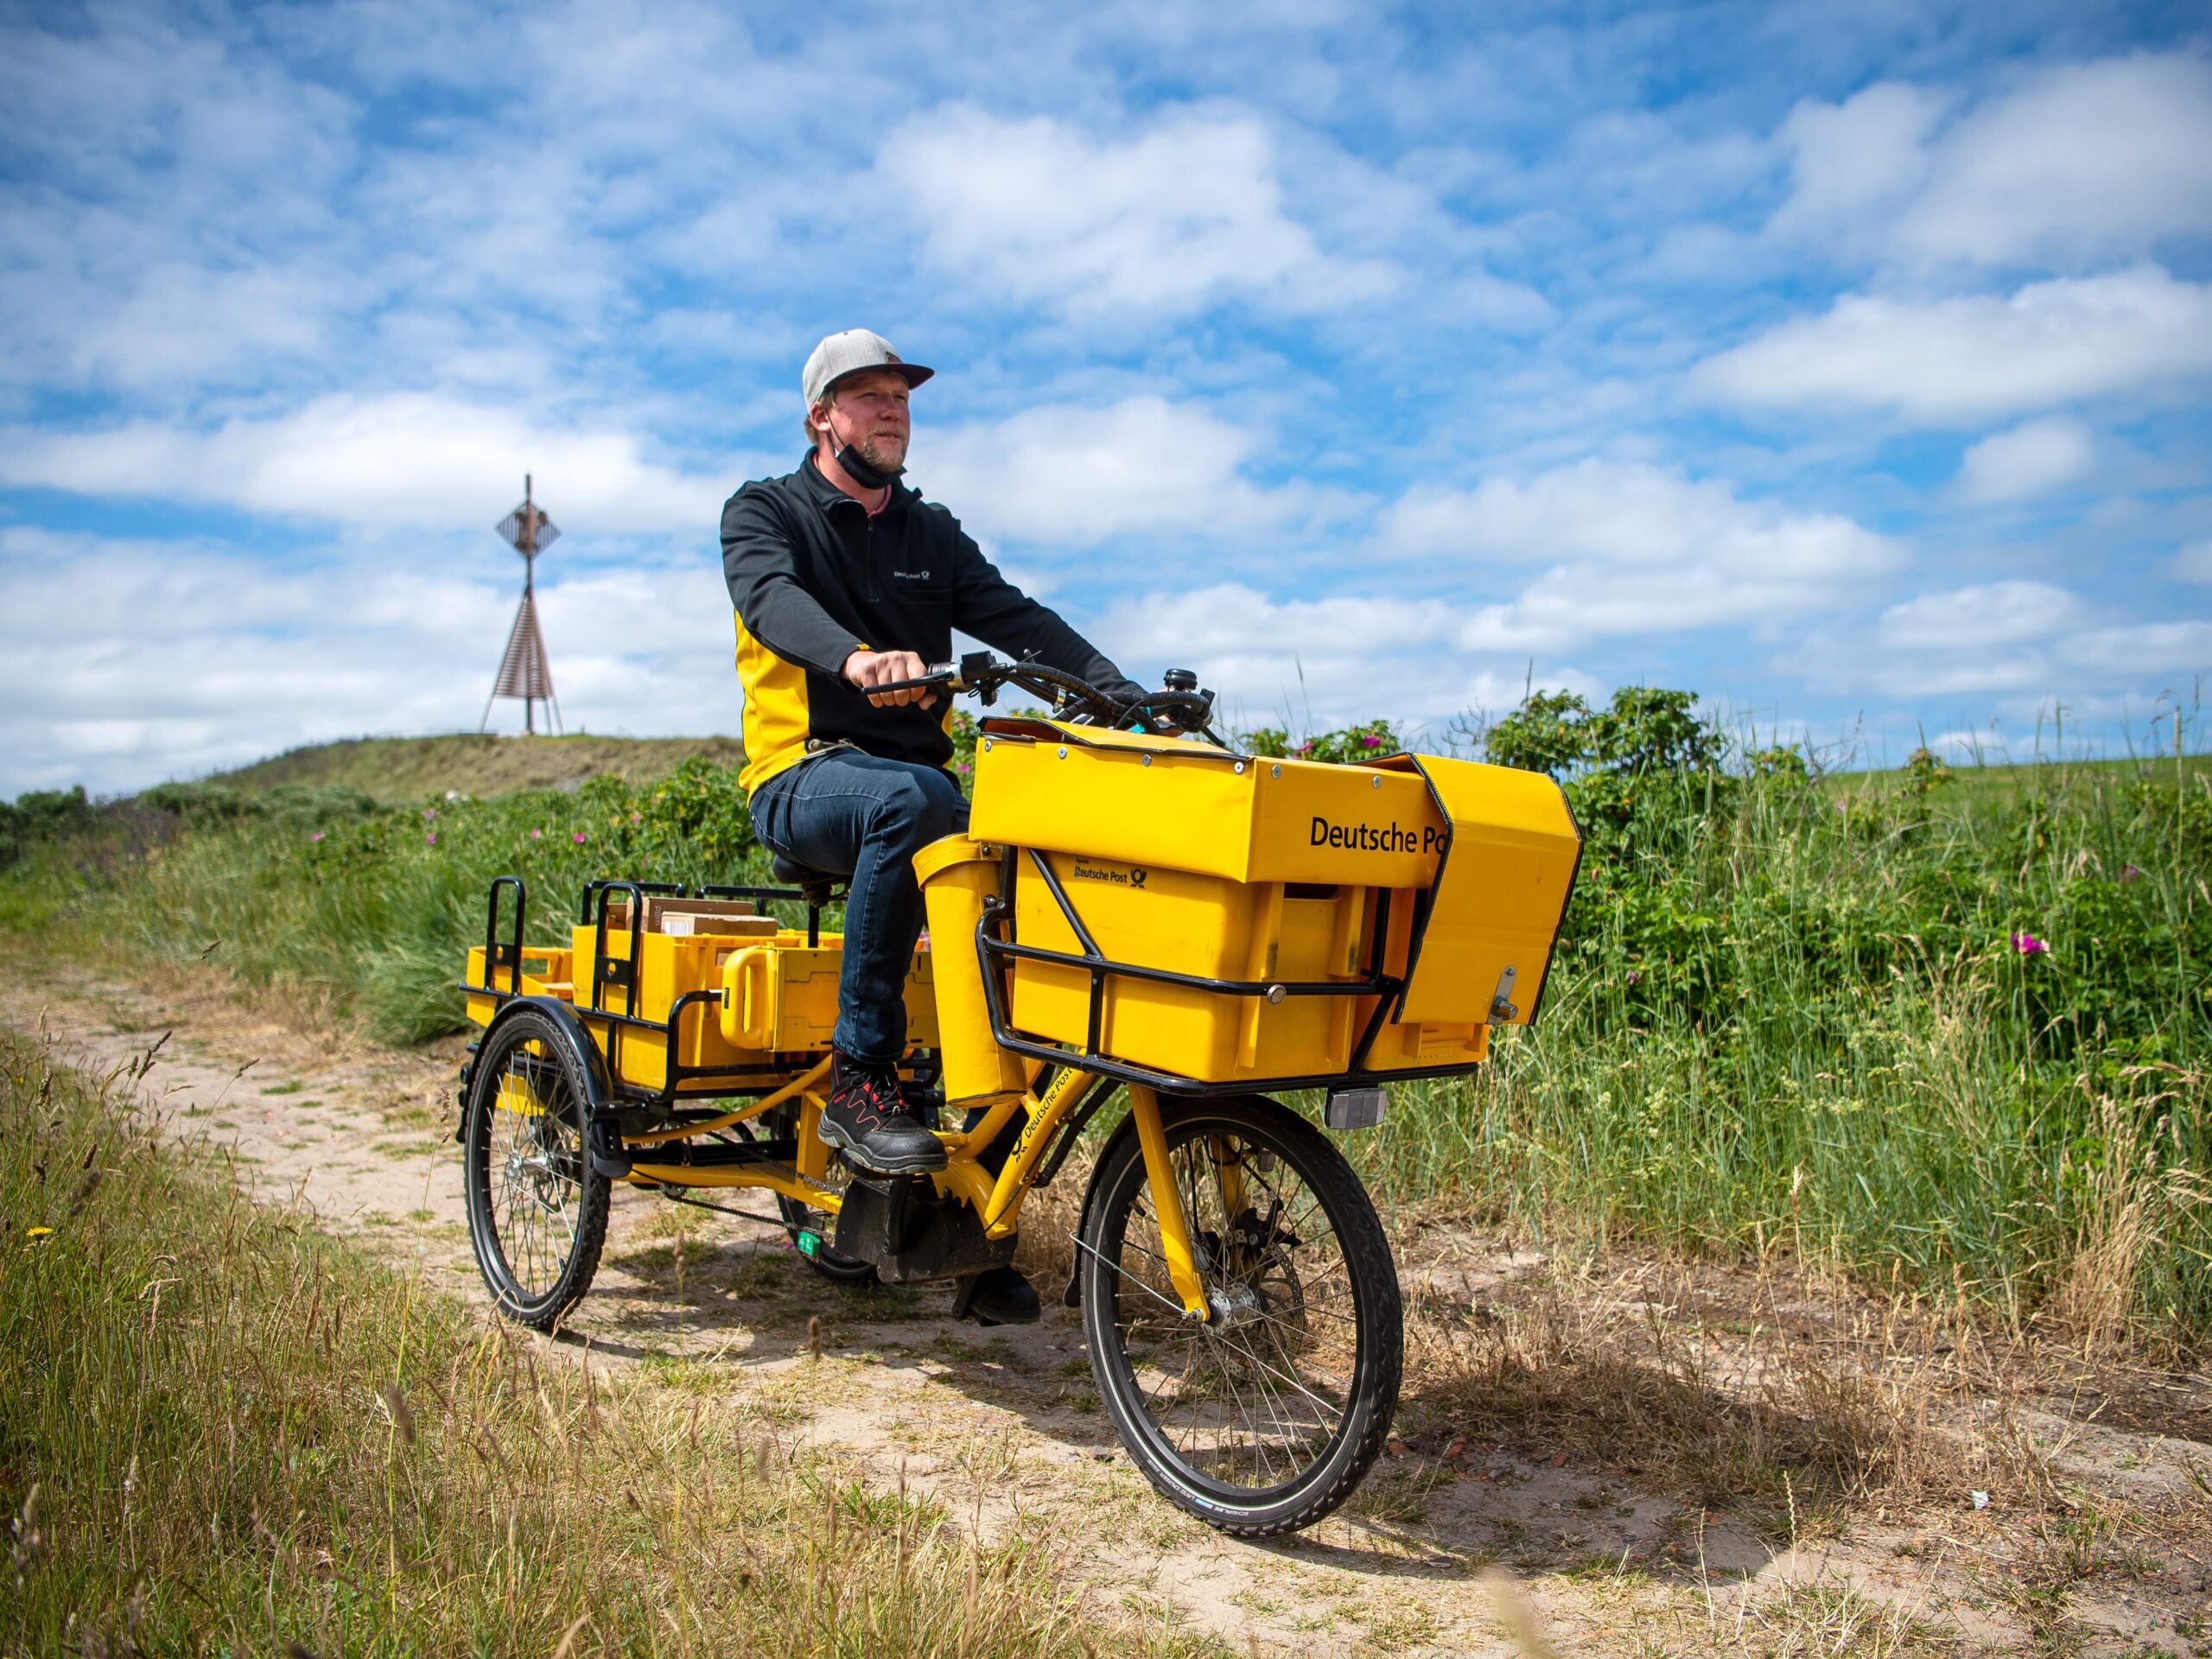 A man in jeans and a black and yellow short ride a tricycle with large cargo baskets on the front and back through a field.